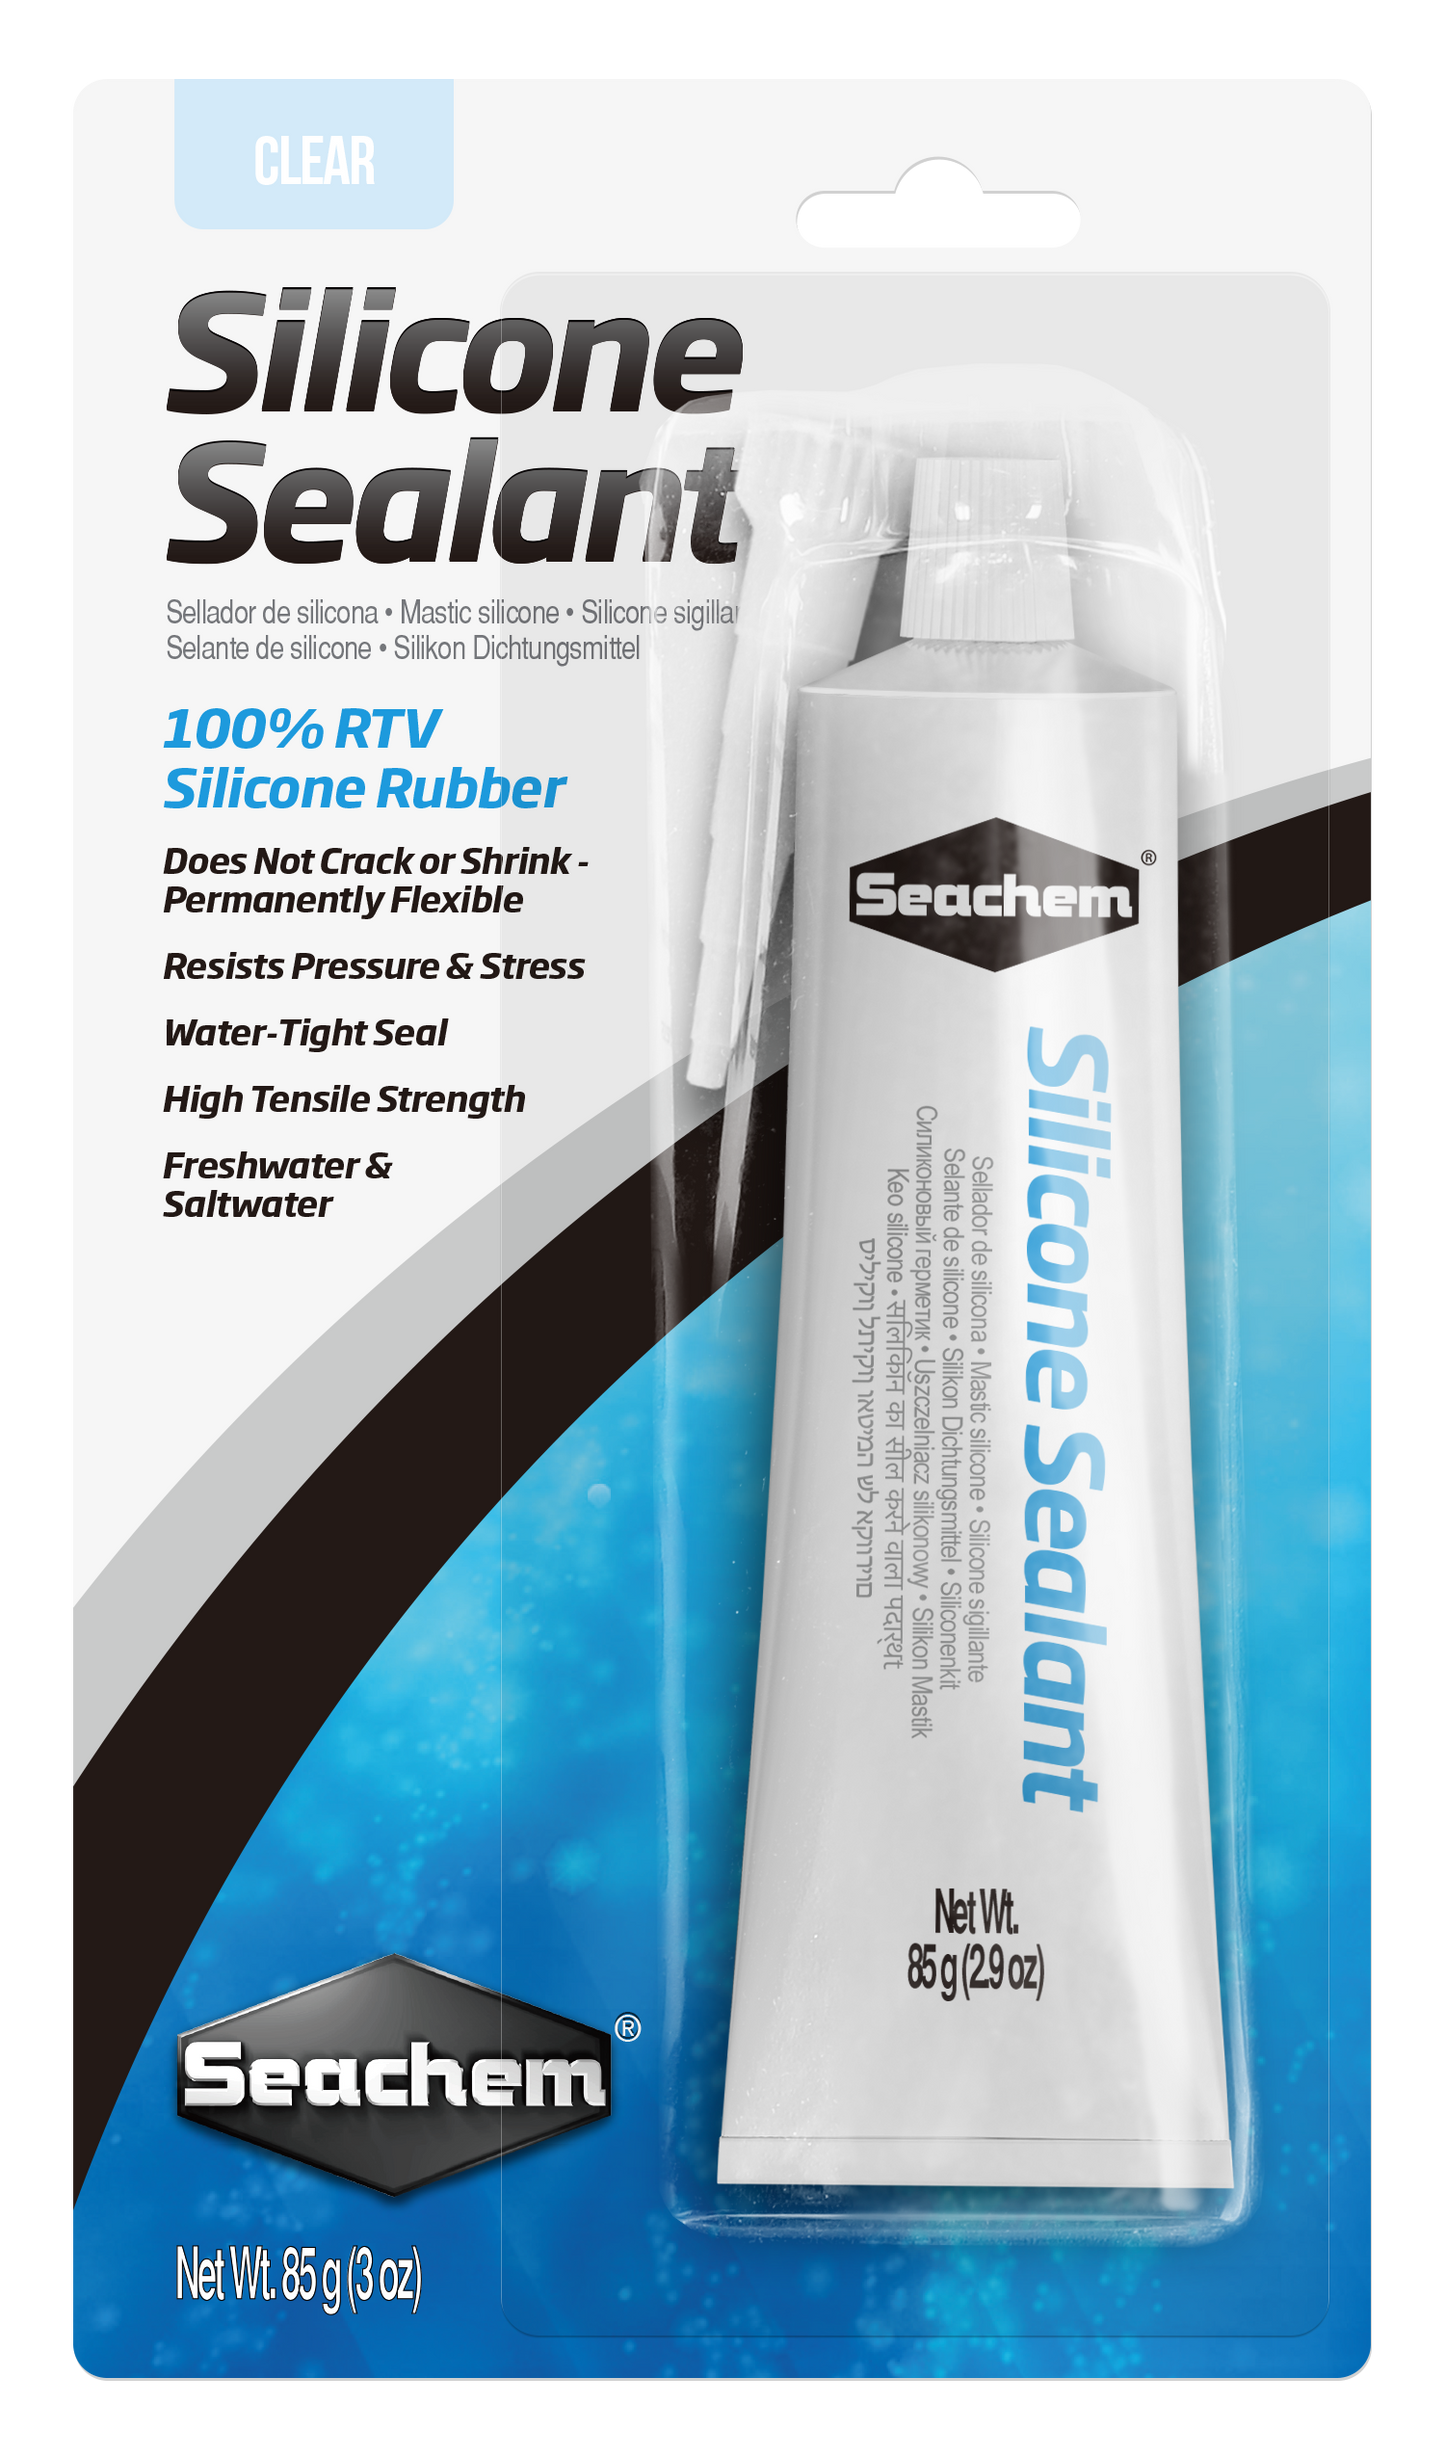 silicone sealant/adhesive - clear